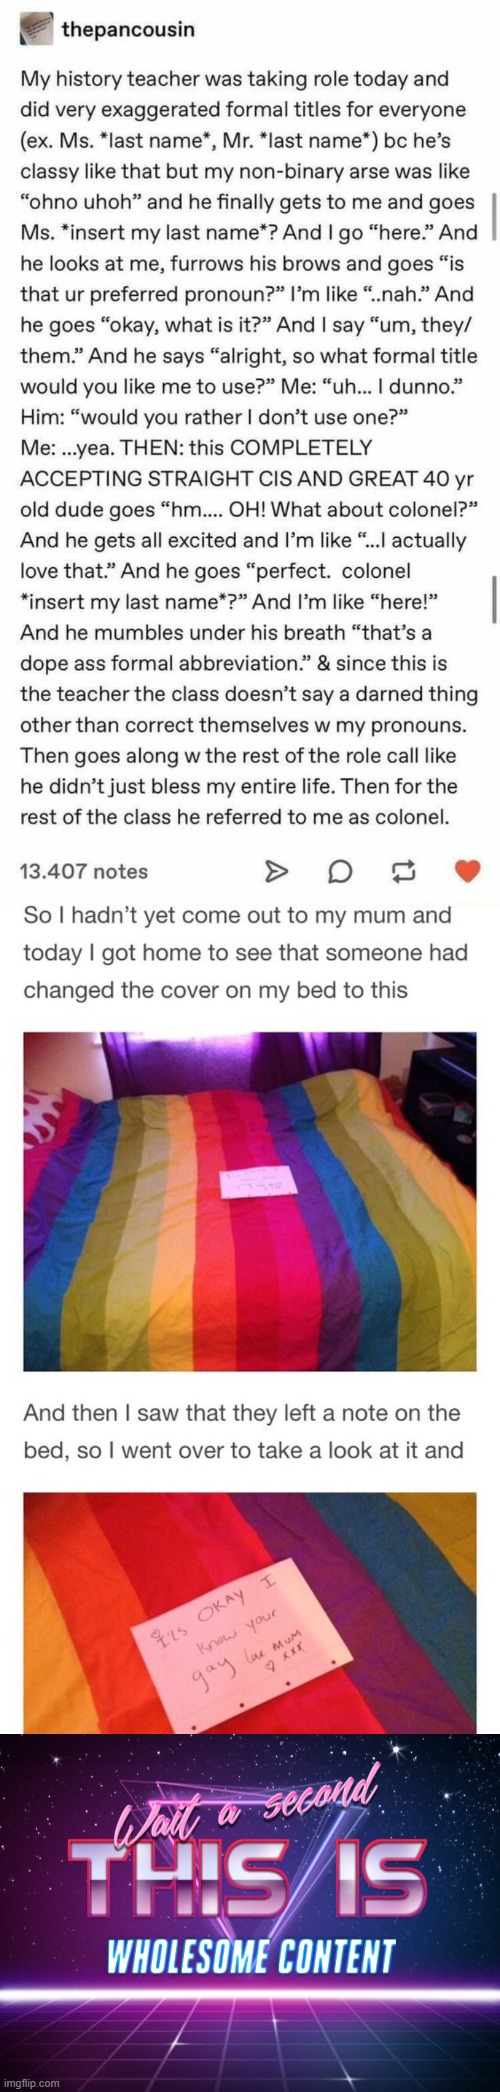 Shut up and take some wholesome content <3 | image tagged in wait a second this is wholesome content,wholesome 100,wholesome,lgbtq,gay pride,gay | made w/ Imgflip meme maker